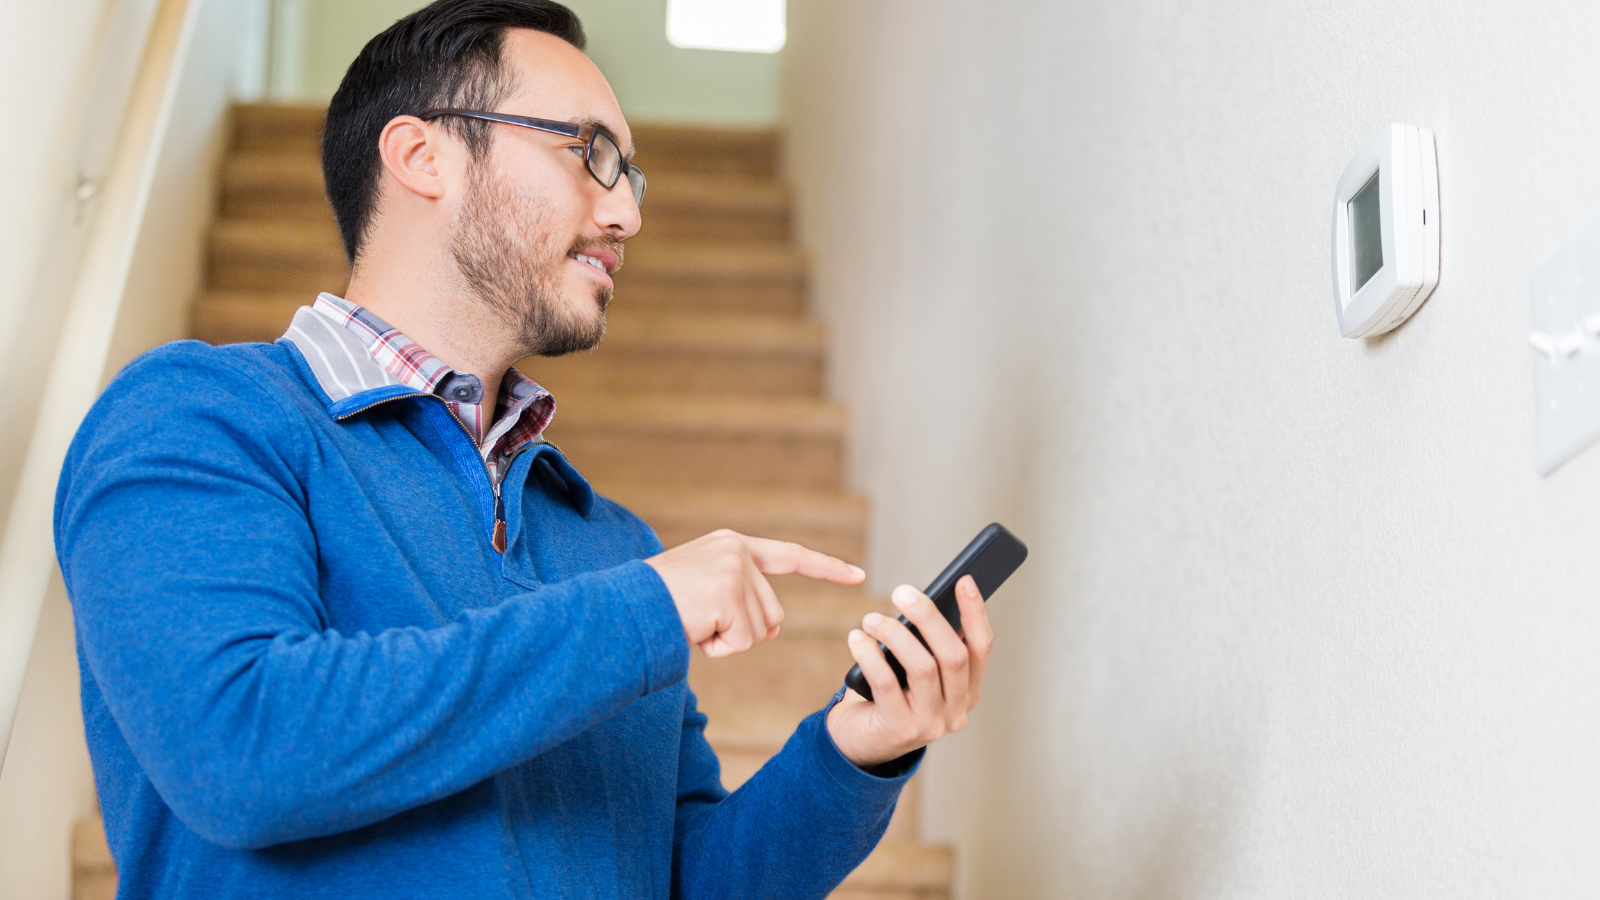 Man in blue sweater managing his smart thermostat with his phone